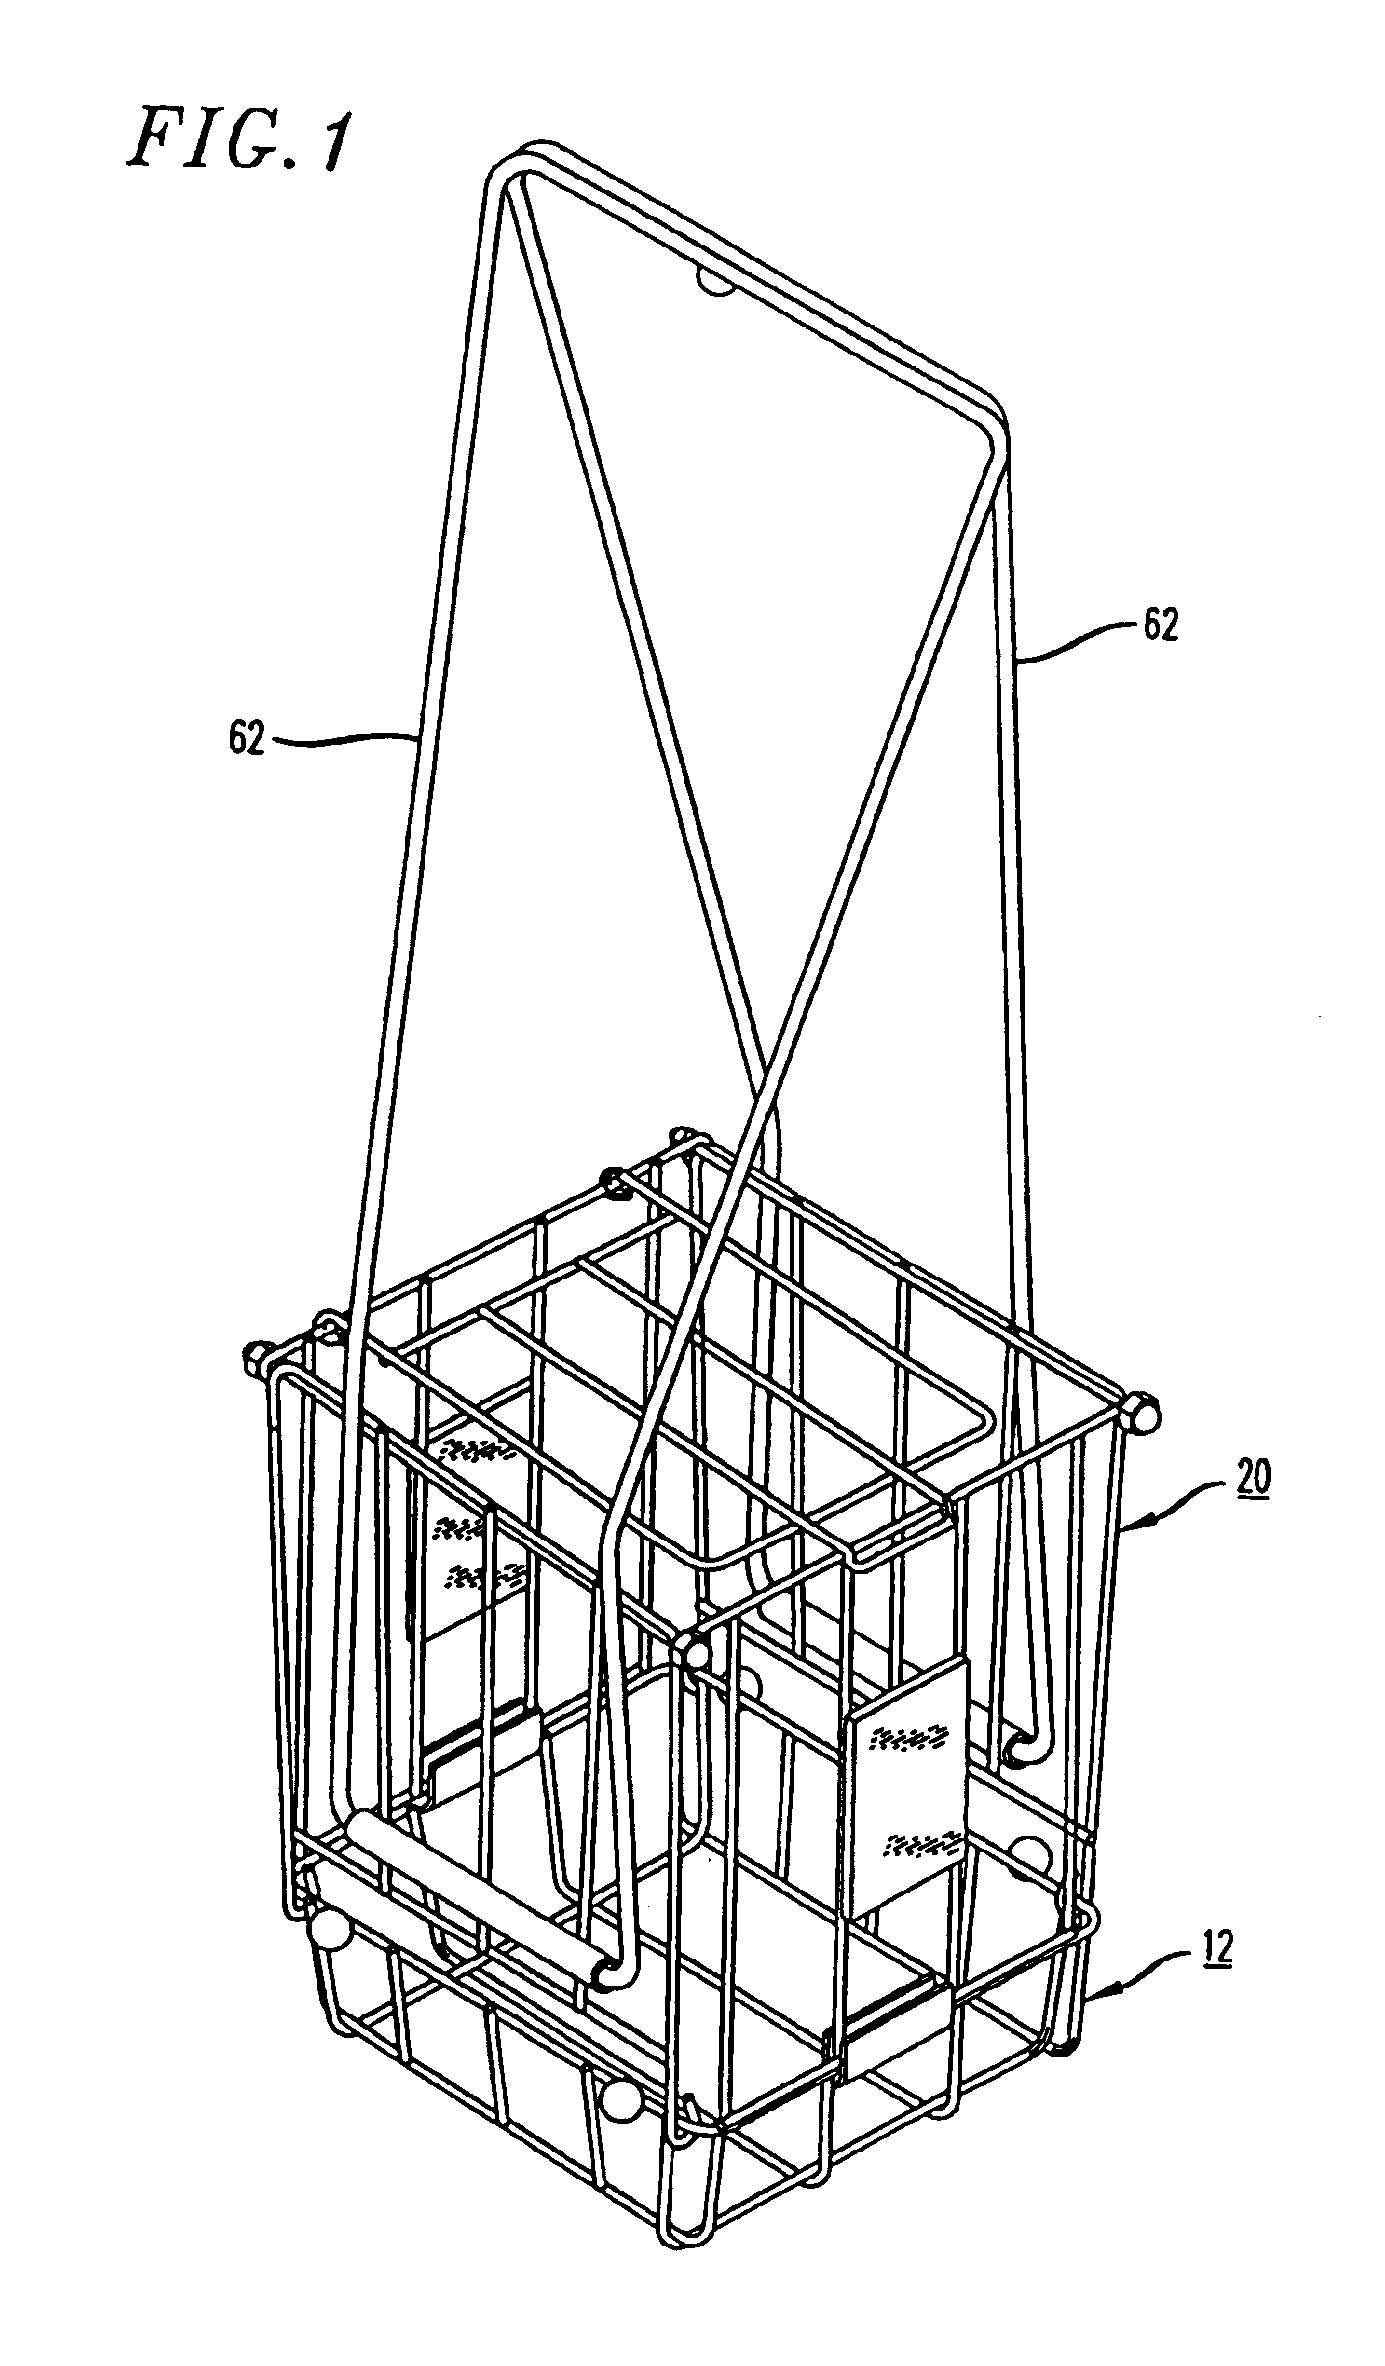 Collapsible basket assembly